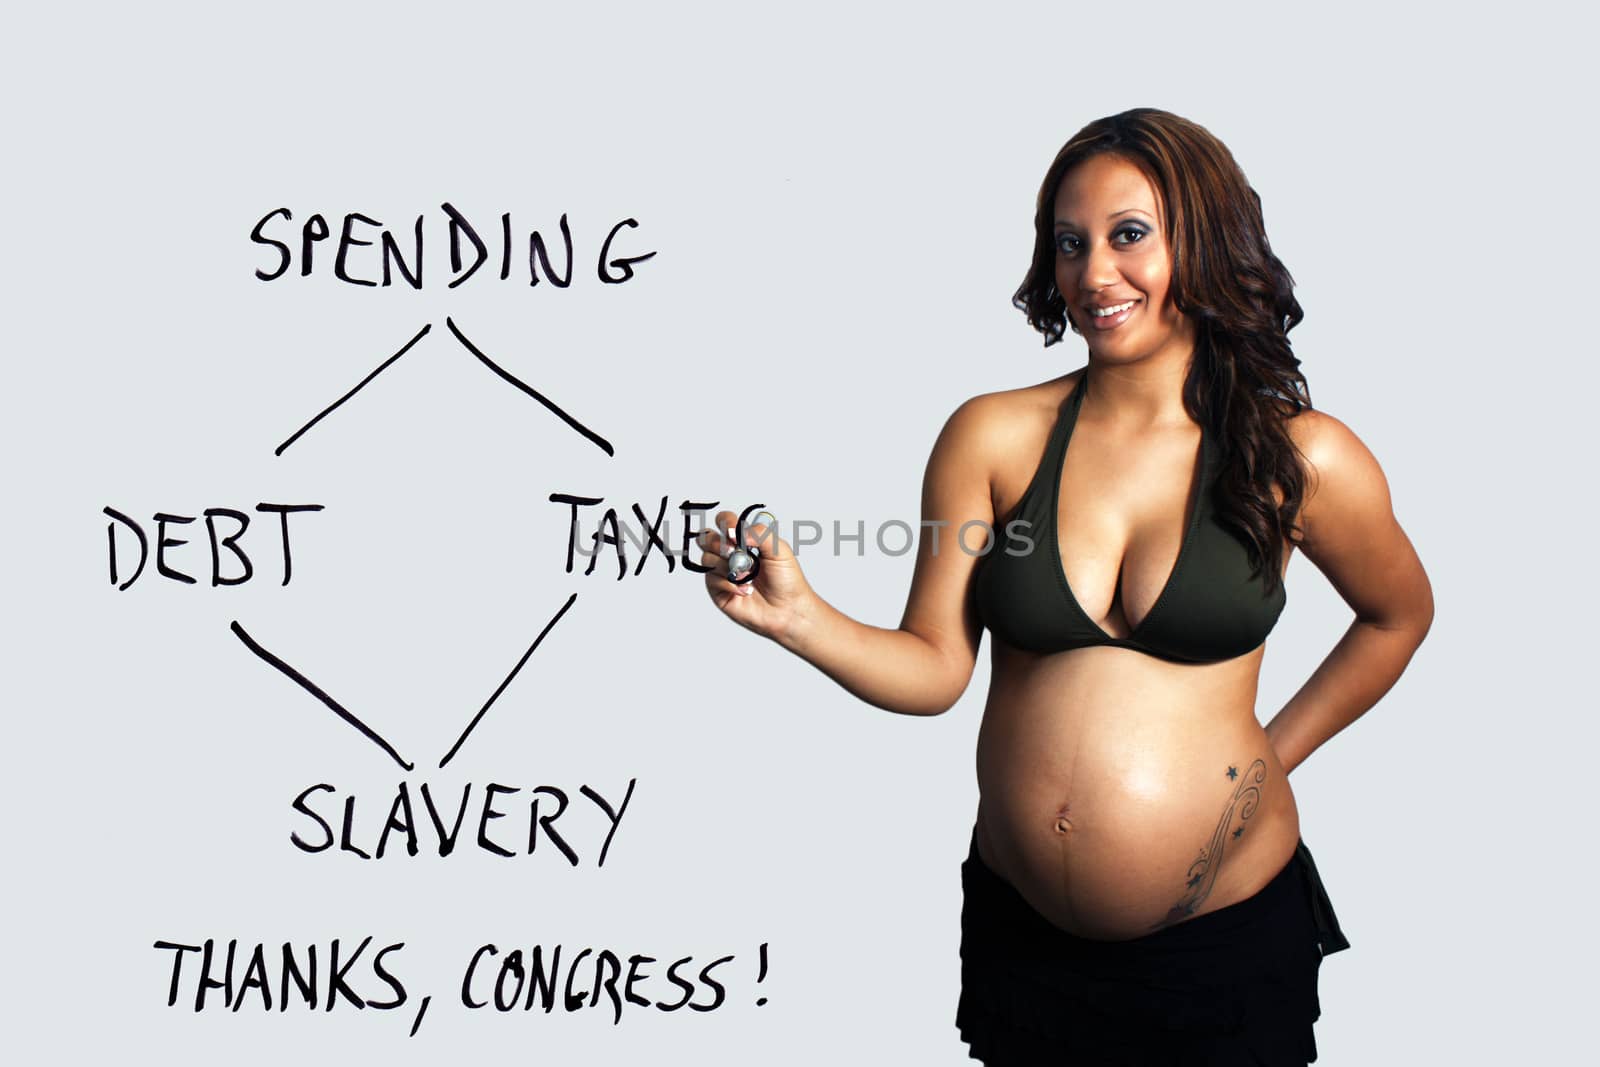 A lovely young multiracial woman, eight months pregnant, holds a heavy marker, illustrating the cycle of spending, debt, taxes, and slavery.